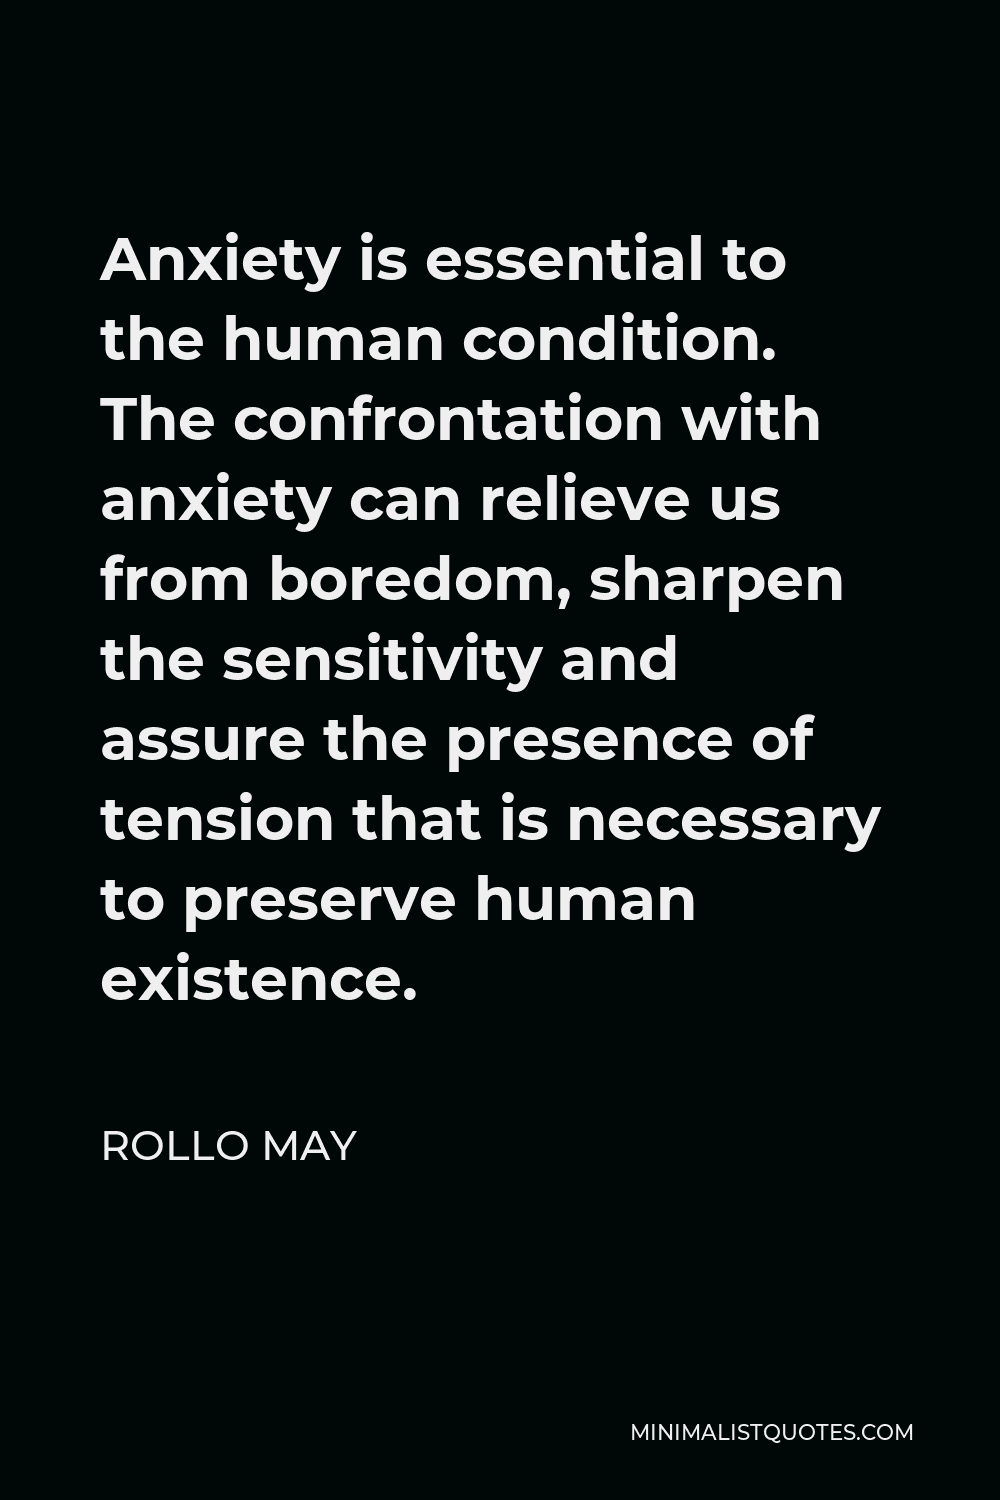 Rollo May Quote - Anxiety is essential to the human condition. The confrontation with anxiety can relieve us from boredom, sharpen the sensitivity and assure the presence of tension that is necessary to preserve human existence.